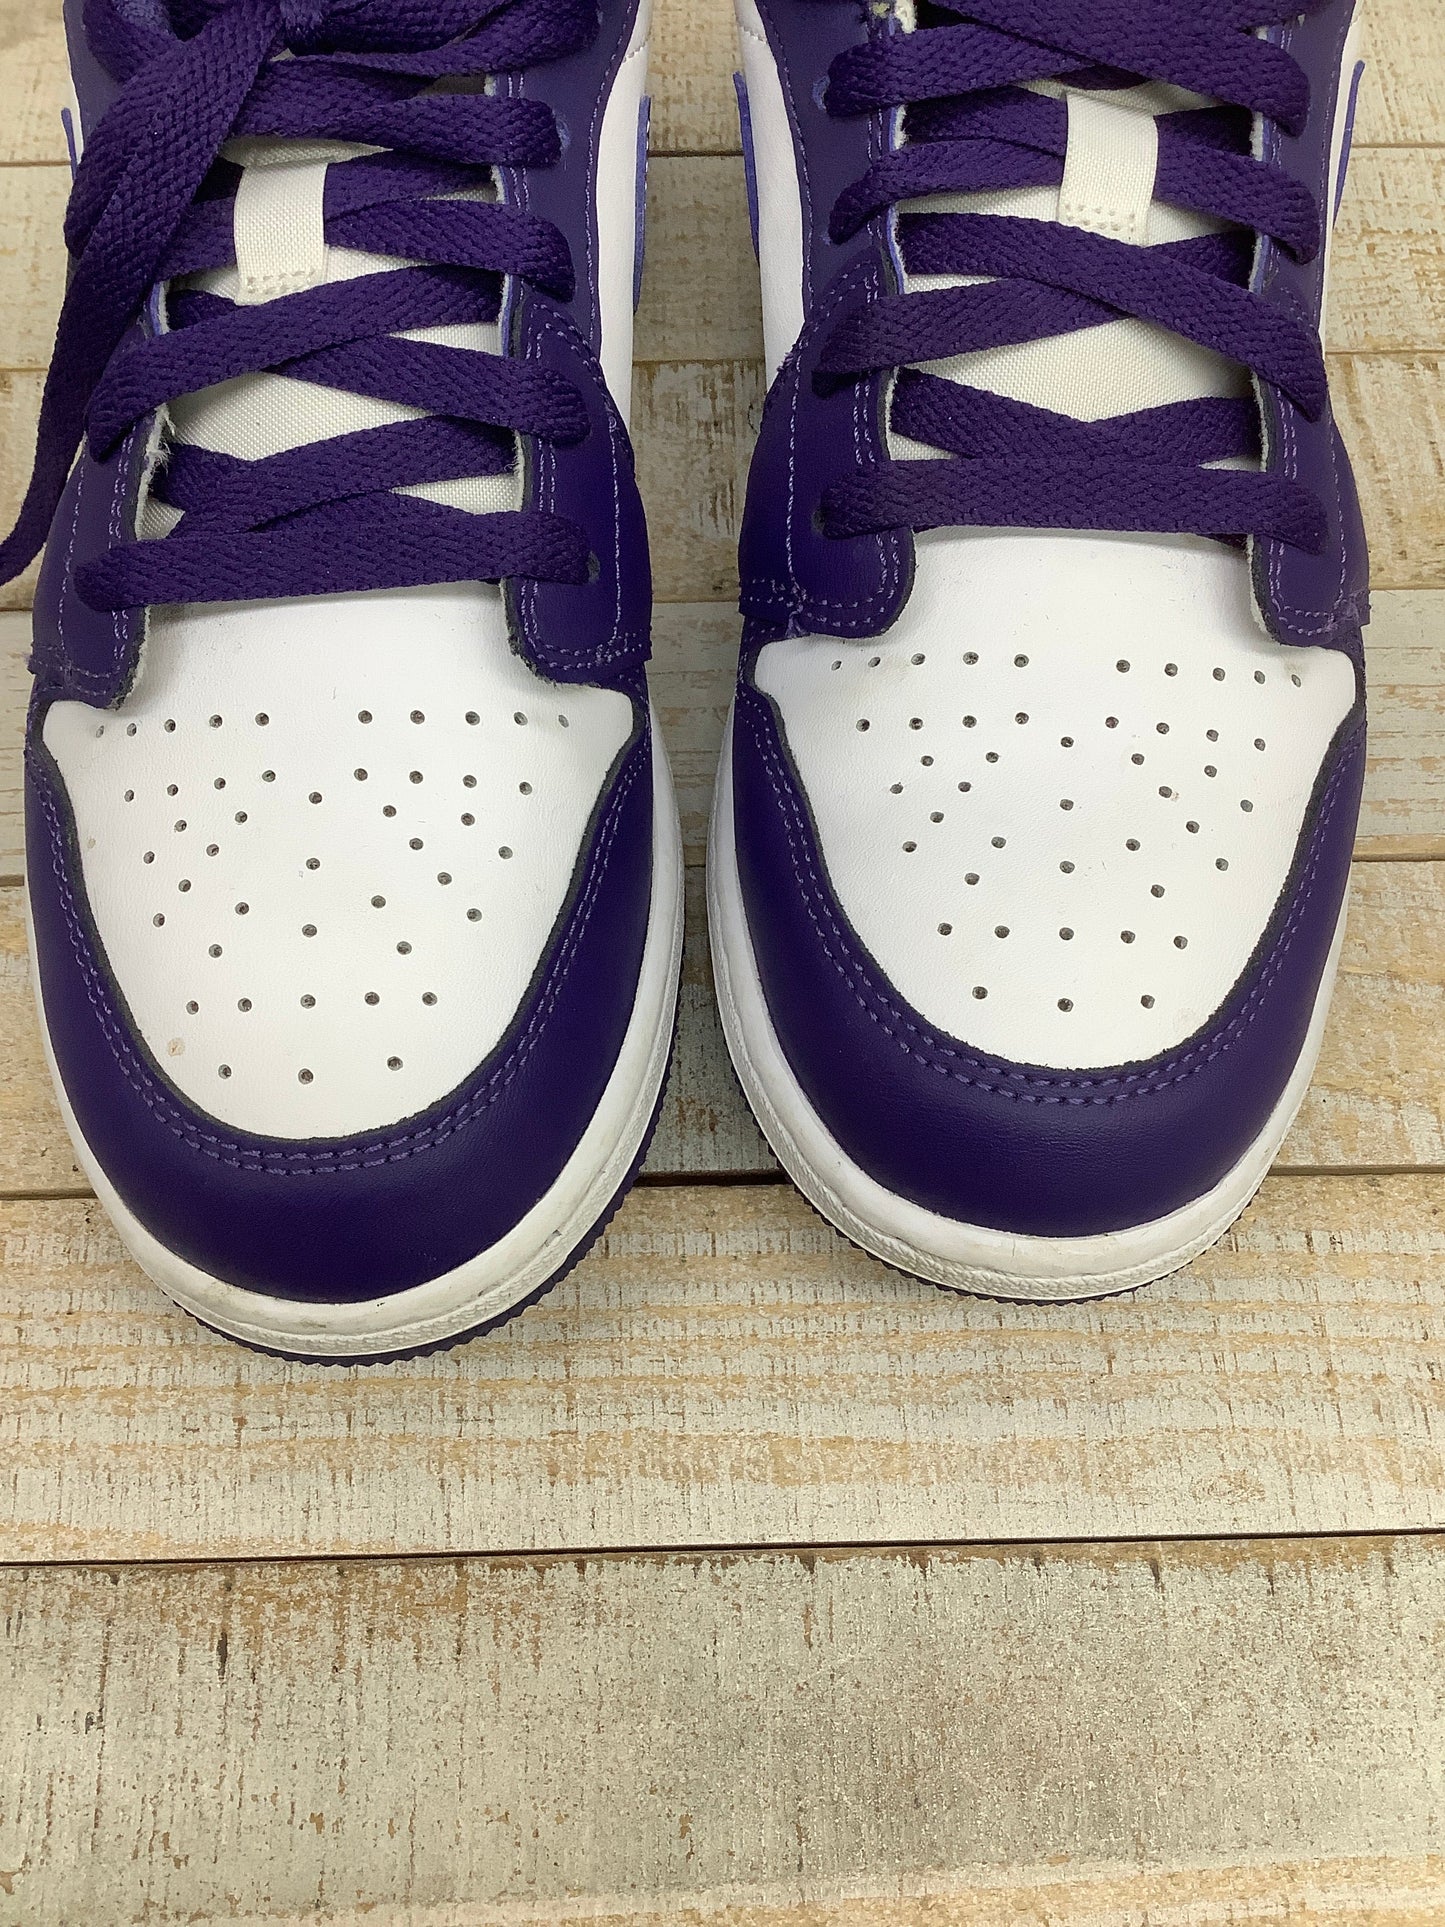 Purple & White Shoes Sneakers Nike, Size 8